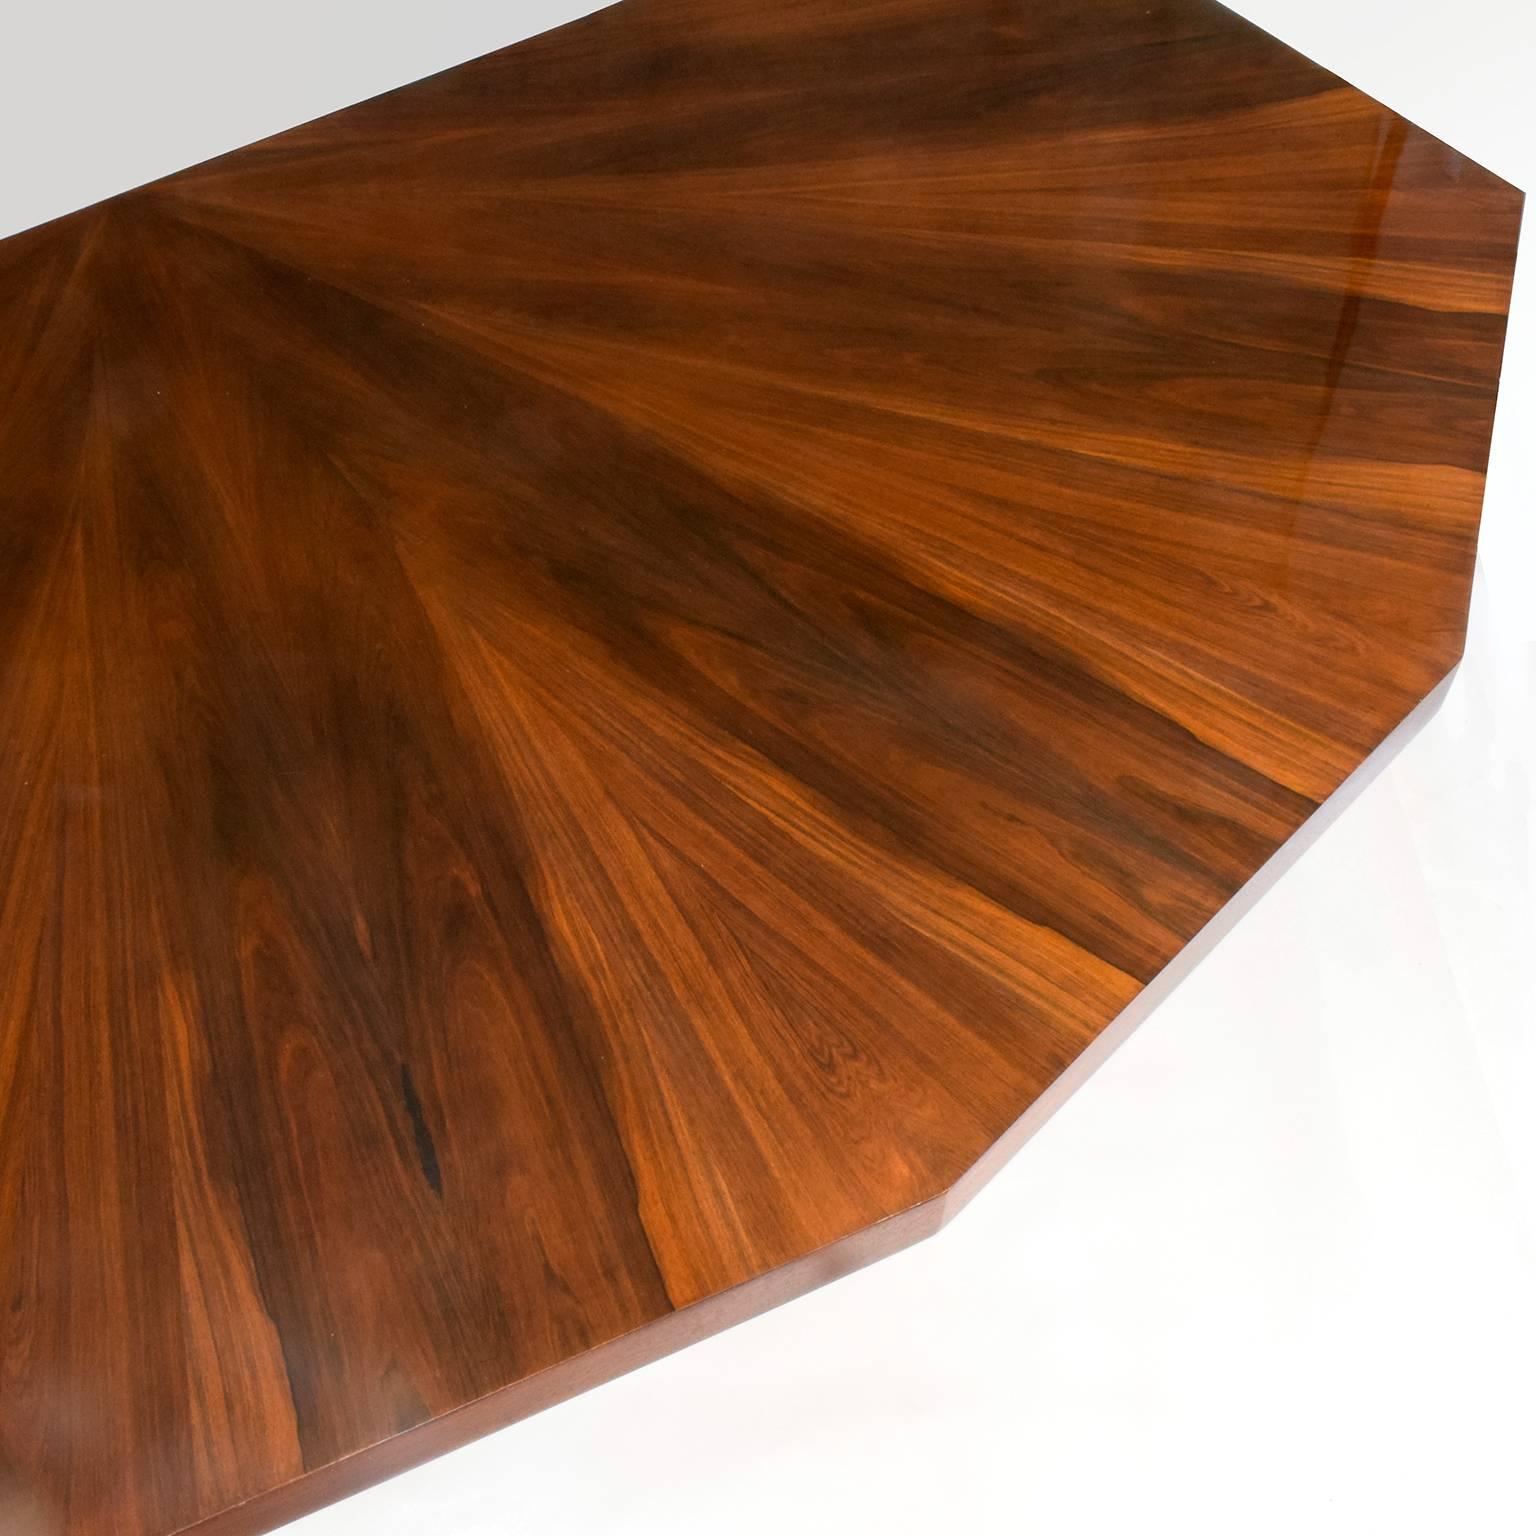 20th Century Scandinavian Modern Rosewood Dining Table with Nine Angled Sides on Chrome Legs 